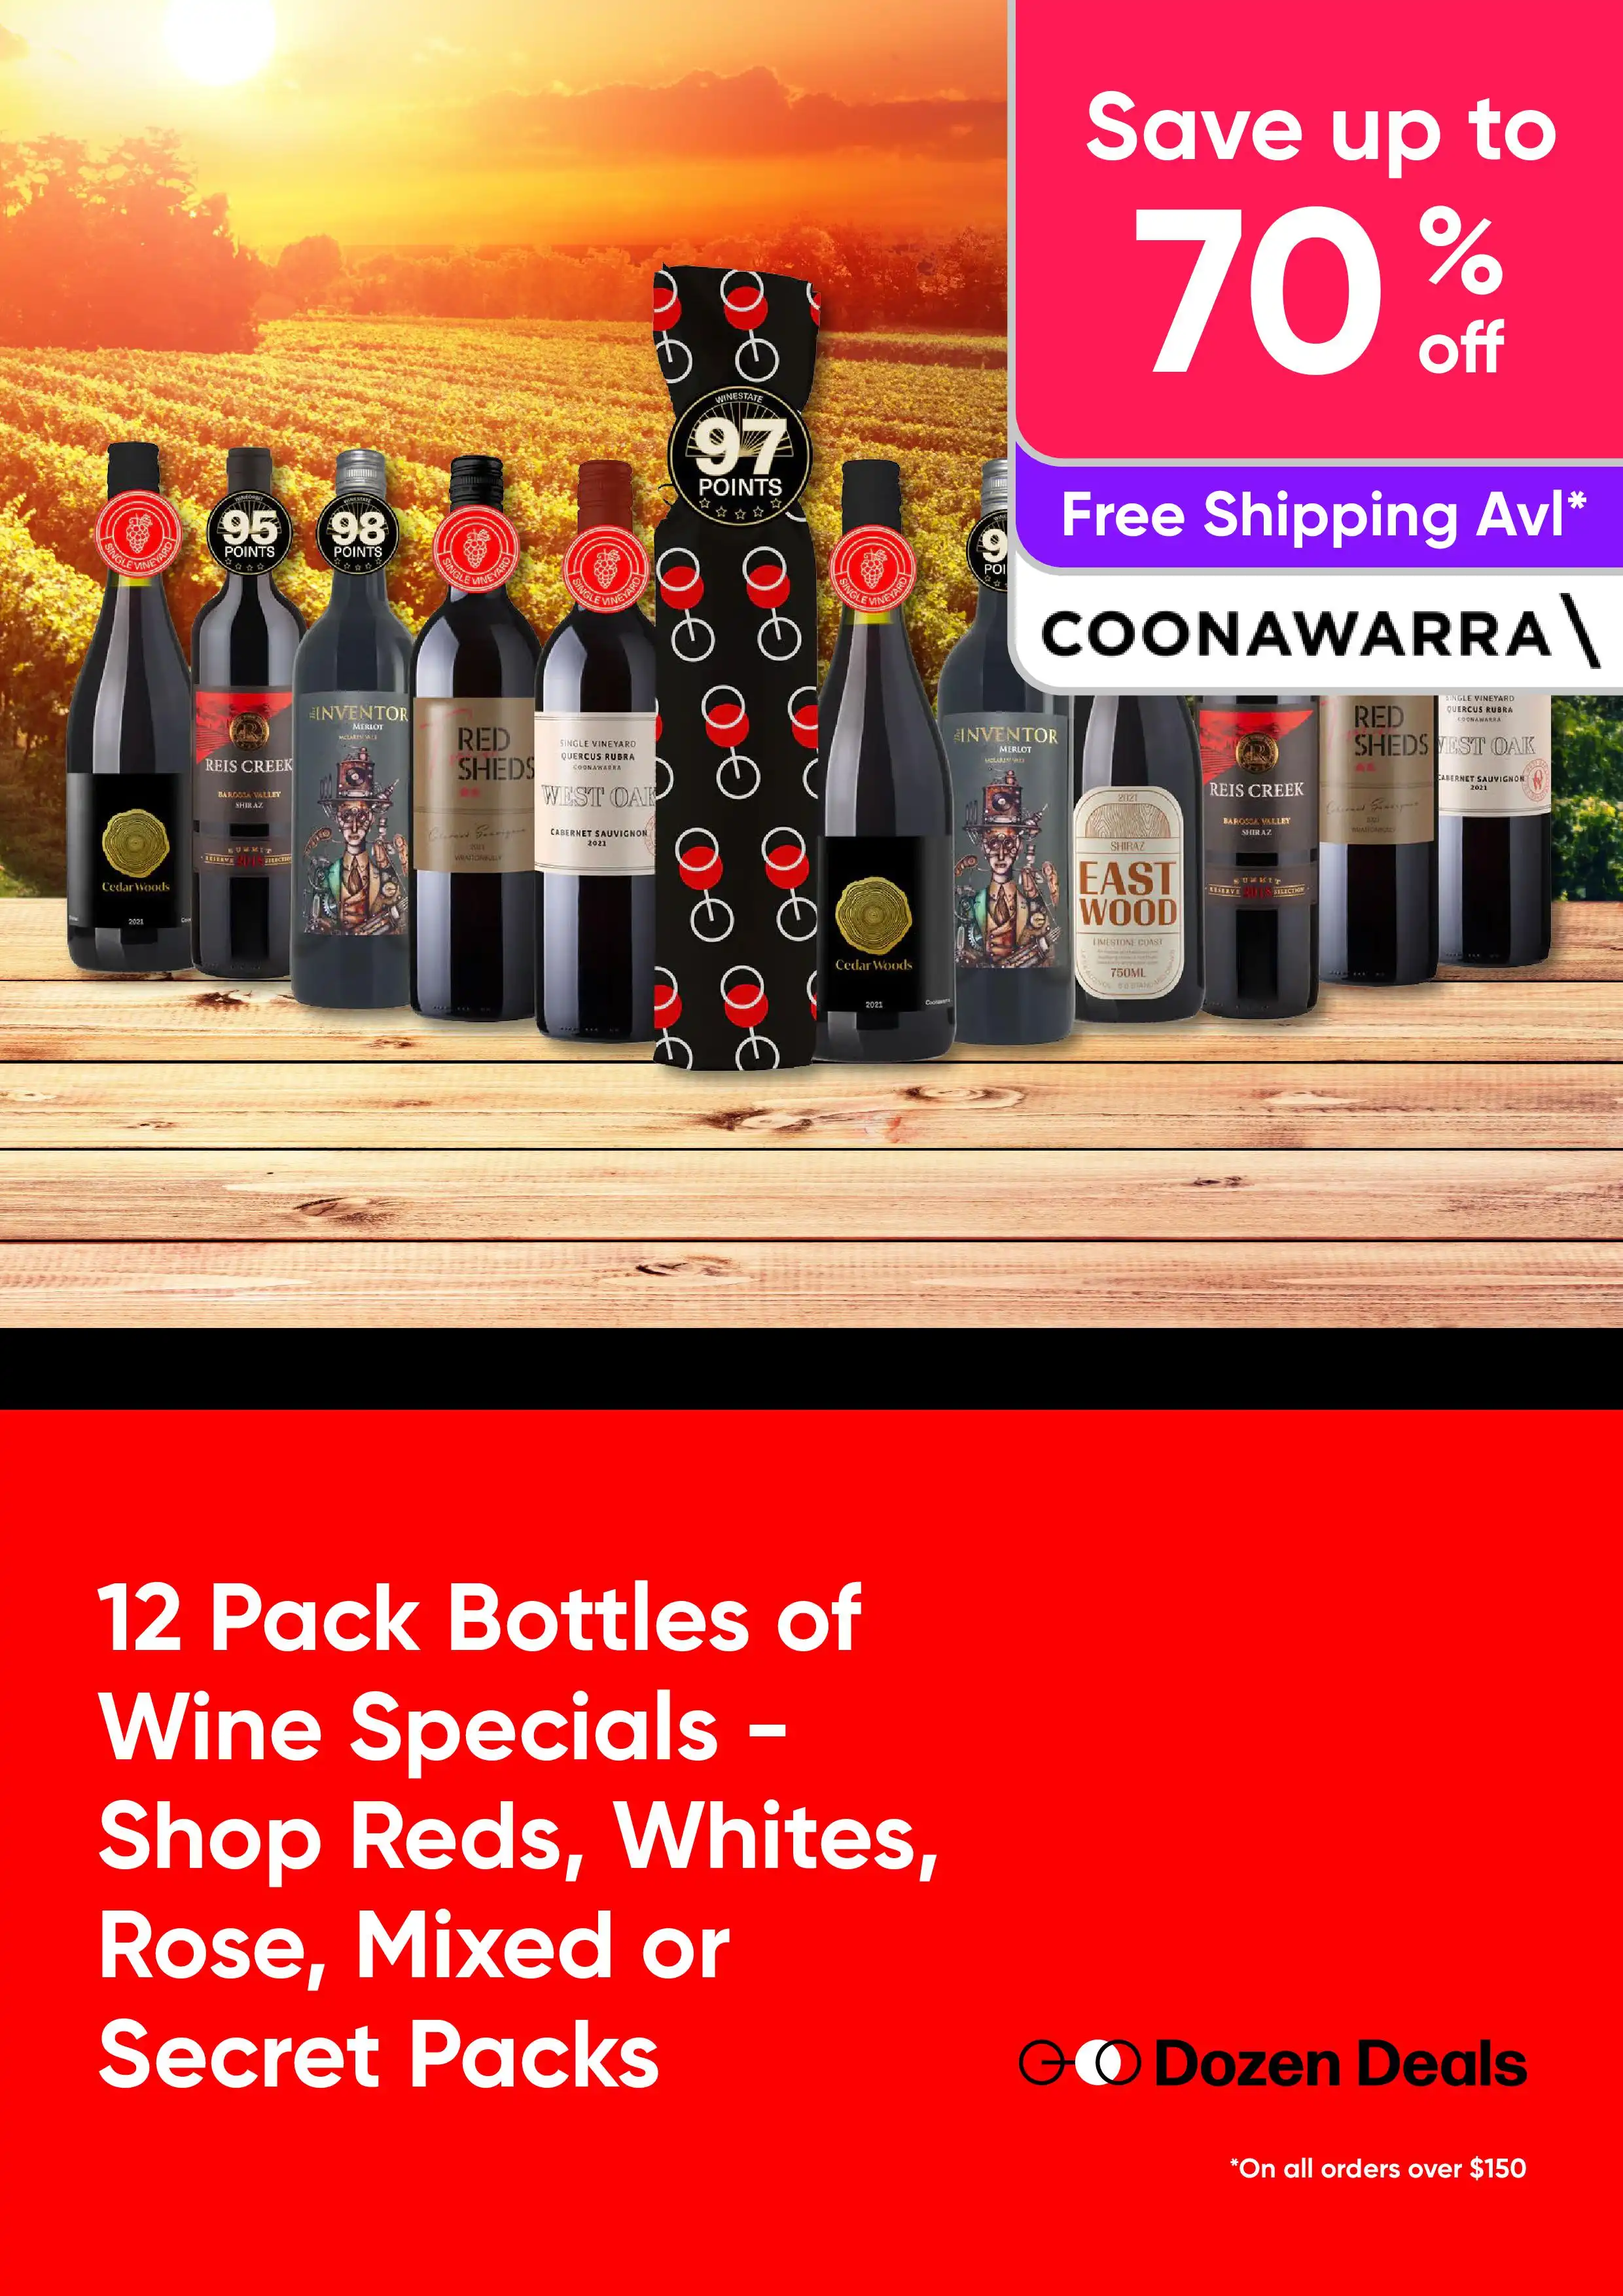 12 Pack Bottles of Wine Specials - Shop Reds, Whites, Rose, Mixed or Secret Packs - Save Up to 70% Off